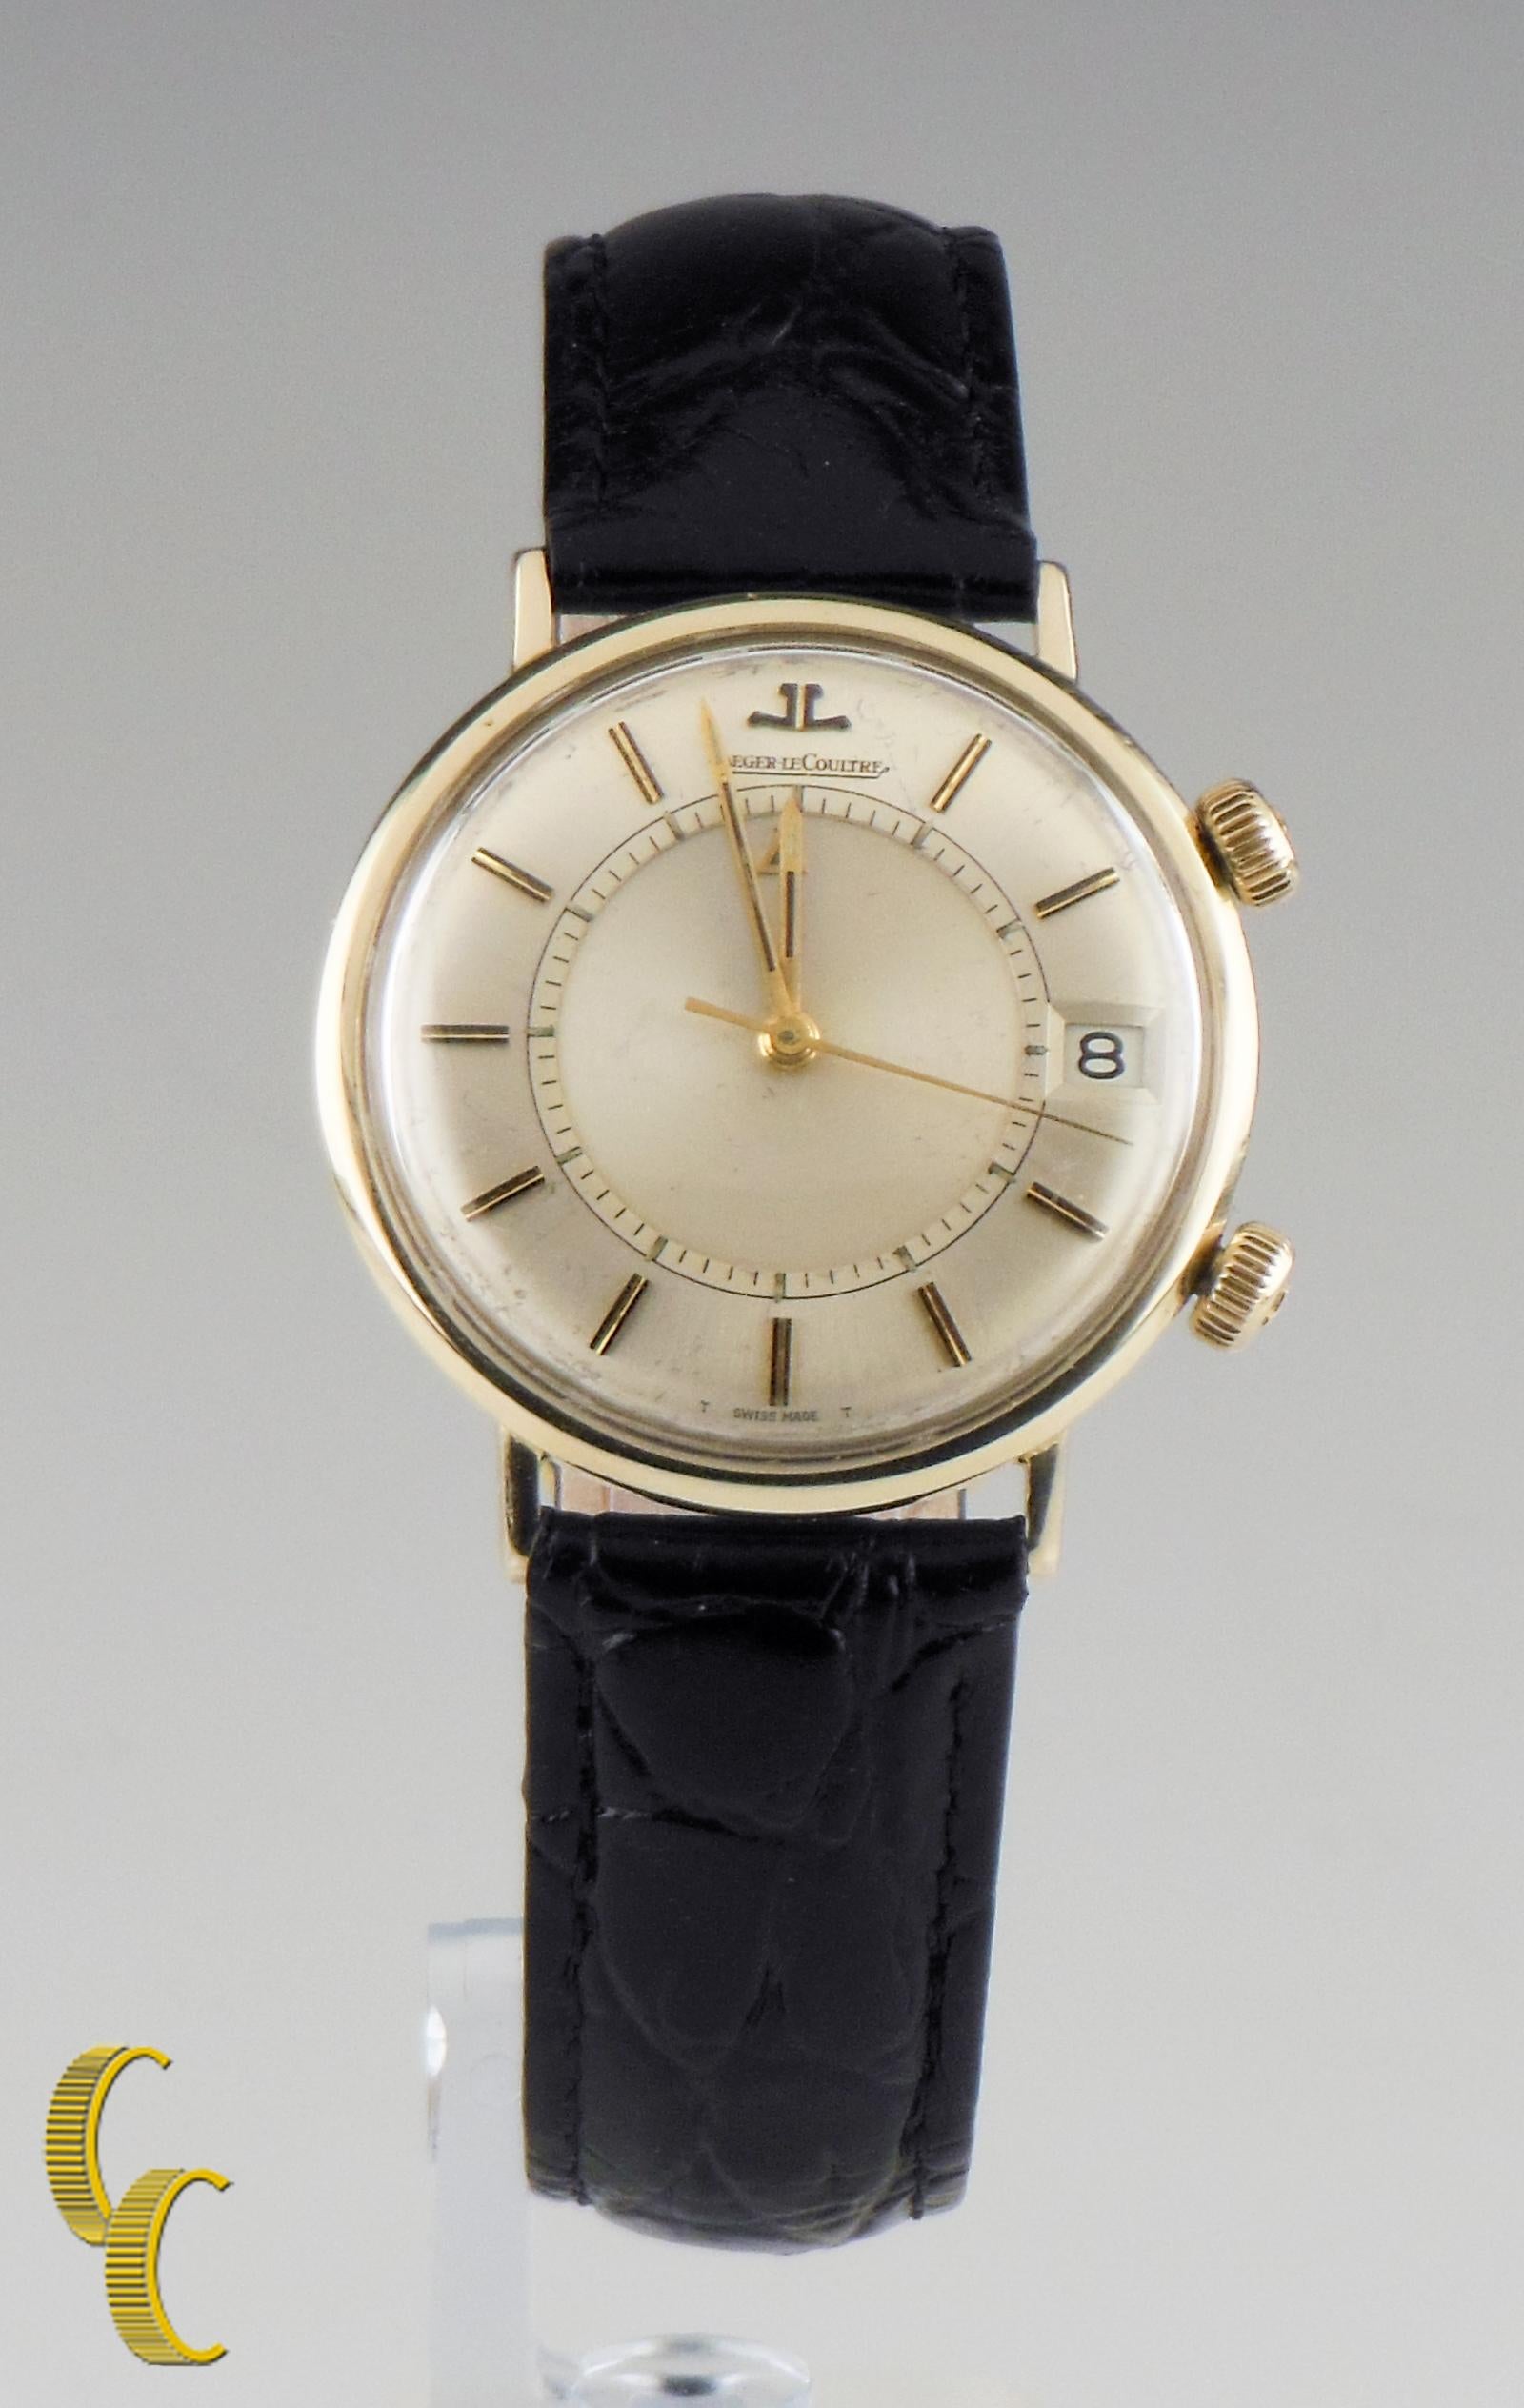 Jaeger- Lecoultre Hand-Winding Alarm Watch W/ Original Box and Case
Model: Alarm watch
Movement #: K911.1940859
Case #: E11008-1134085

Gold Plated Round Case w/ Two Crowns
Case diameter = 35 mm (37 mm w/ Crown) 
Lug-to-Lug Distance = 38